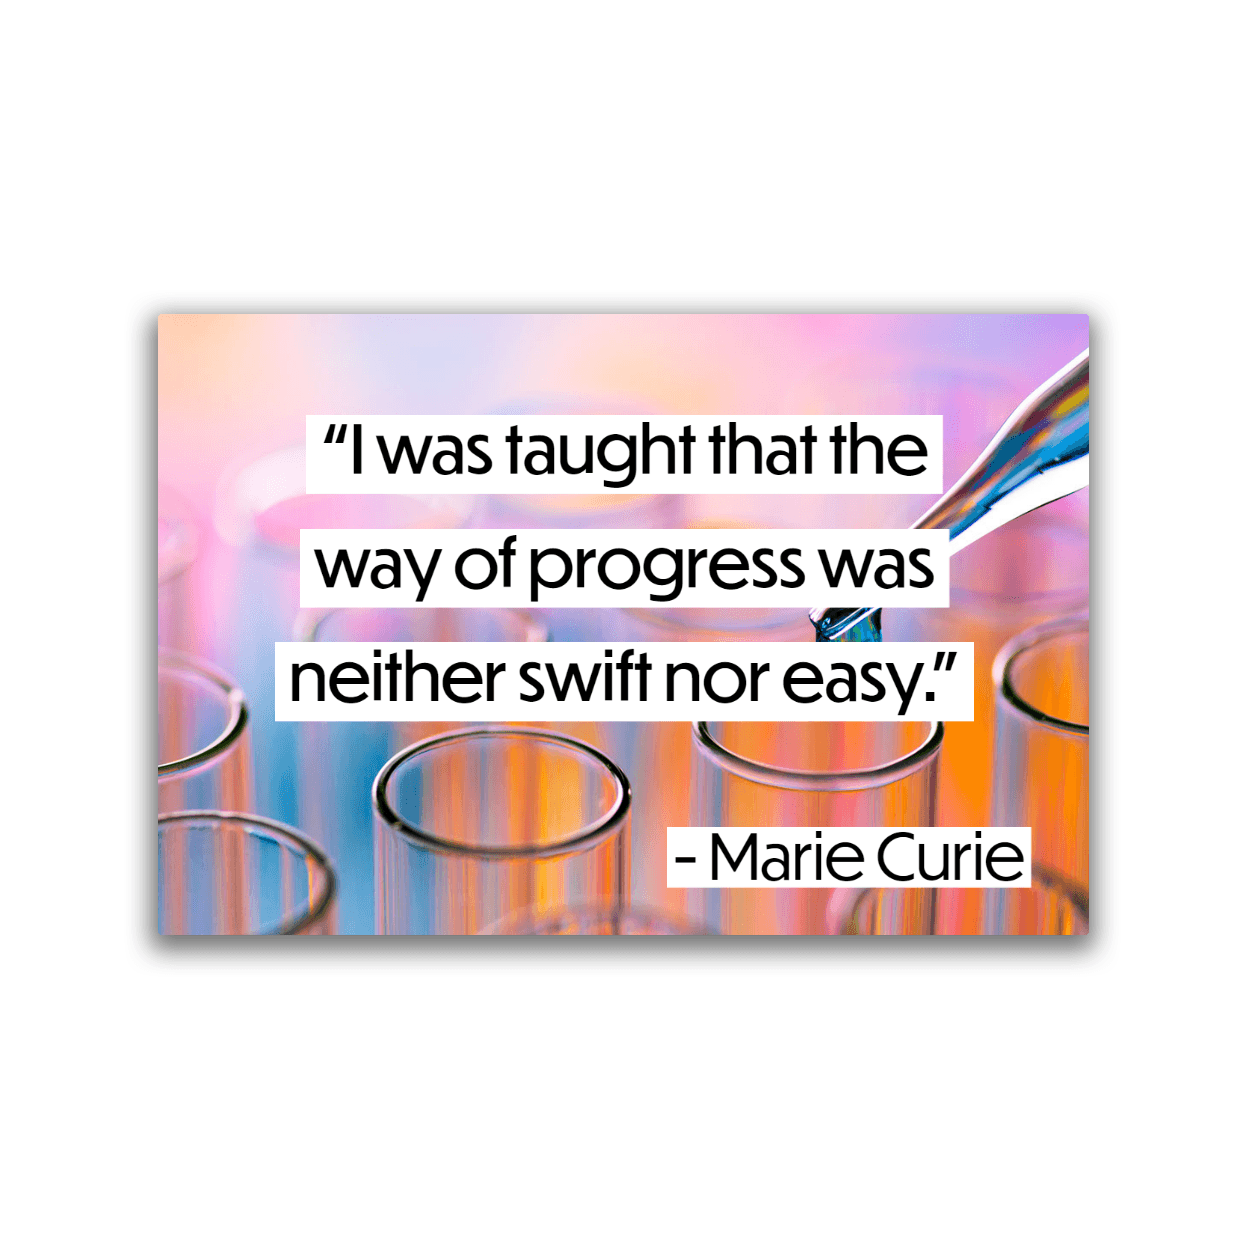 Image of a 2x3 magnet with a Marie Curie  quote